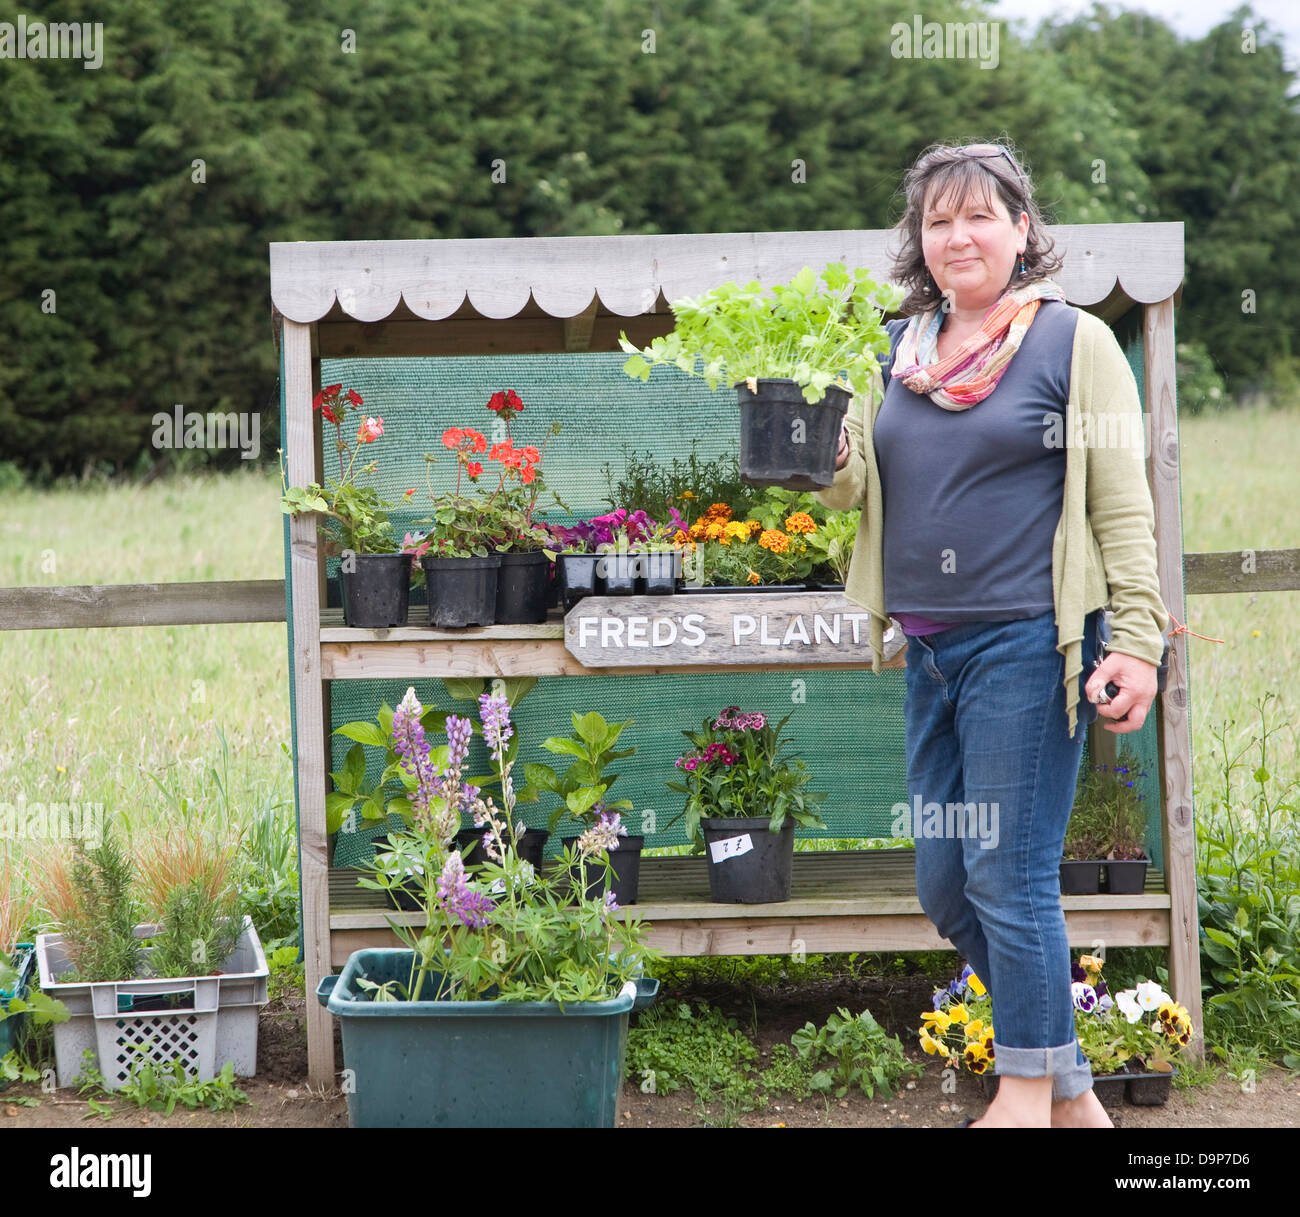 Woman at roadside plant stall Bawdsey, Suffolk, England Stock Photo